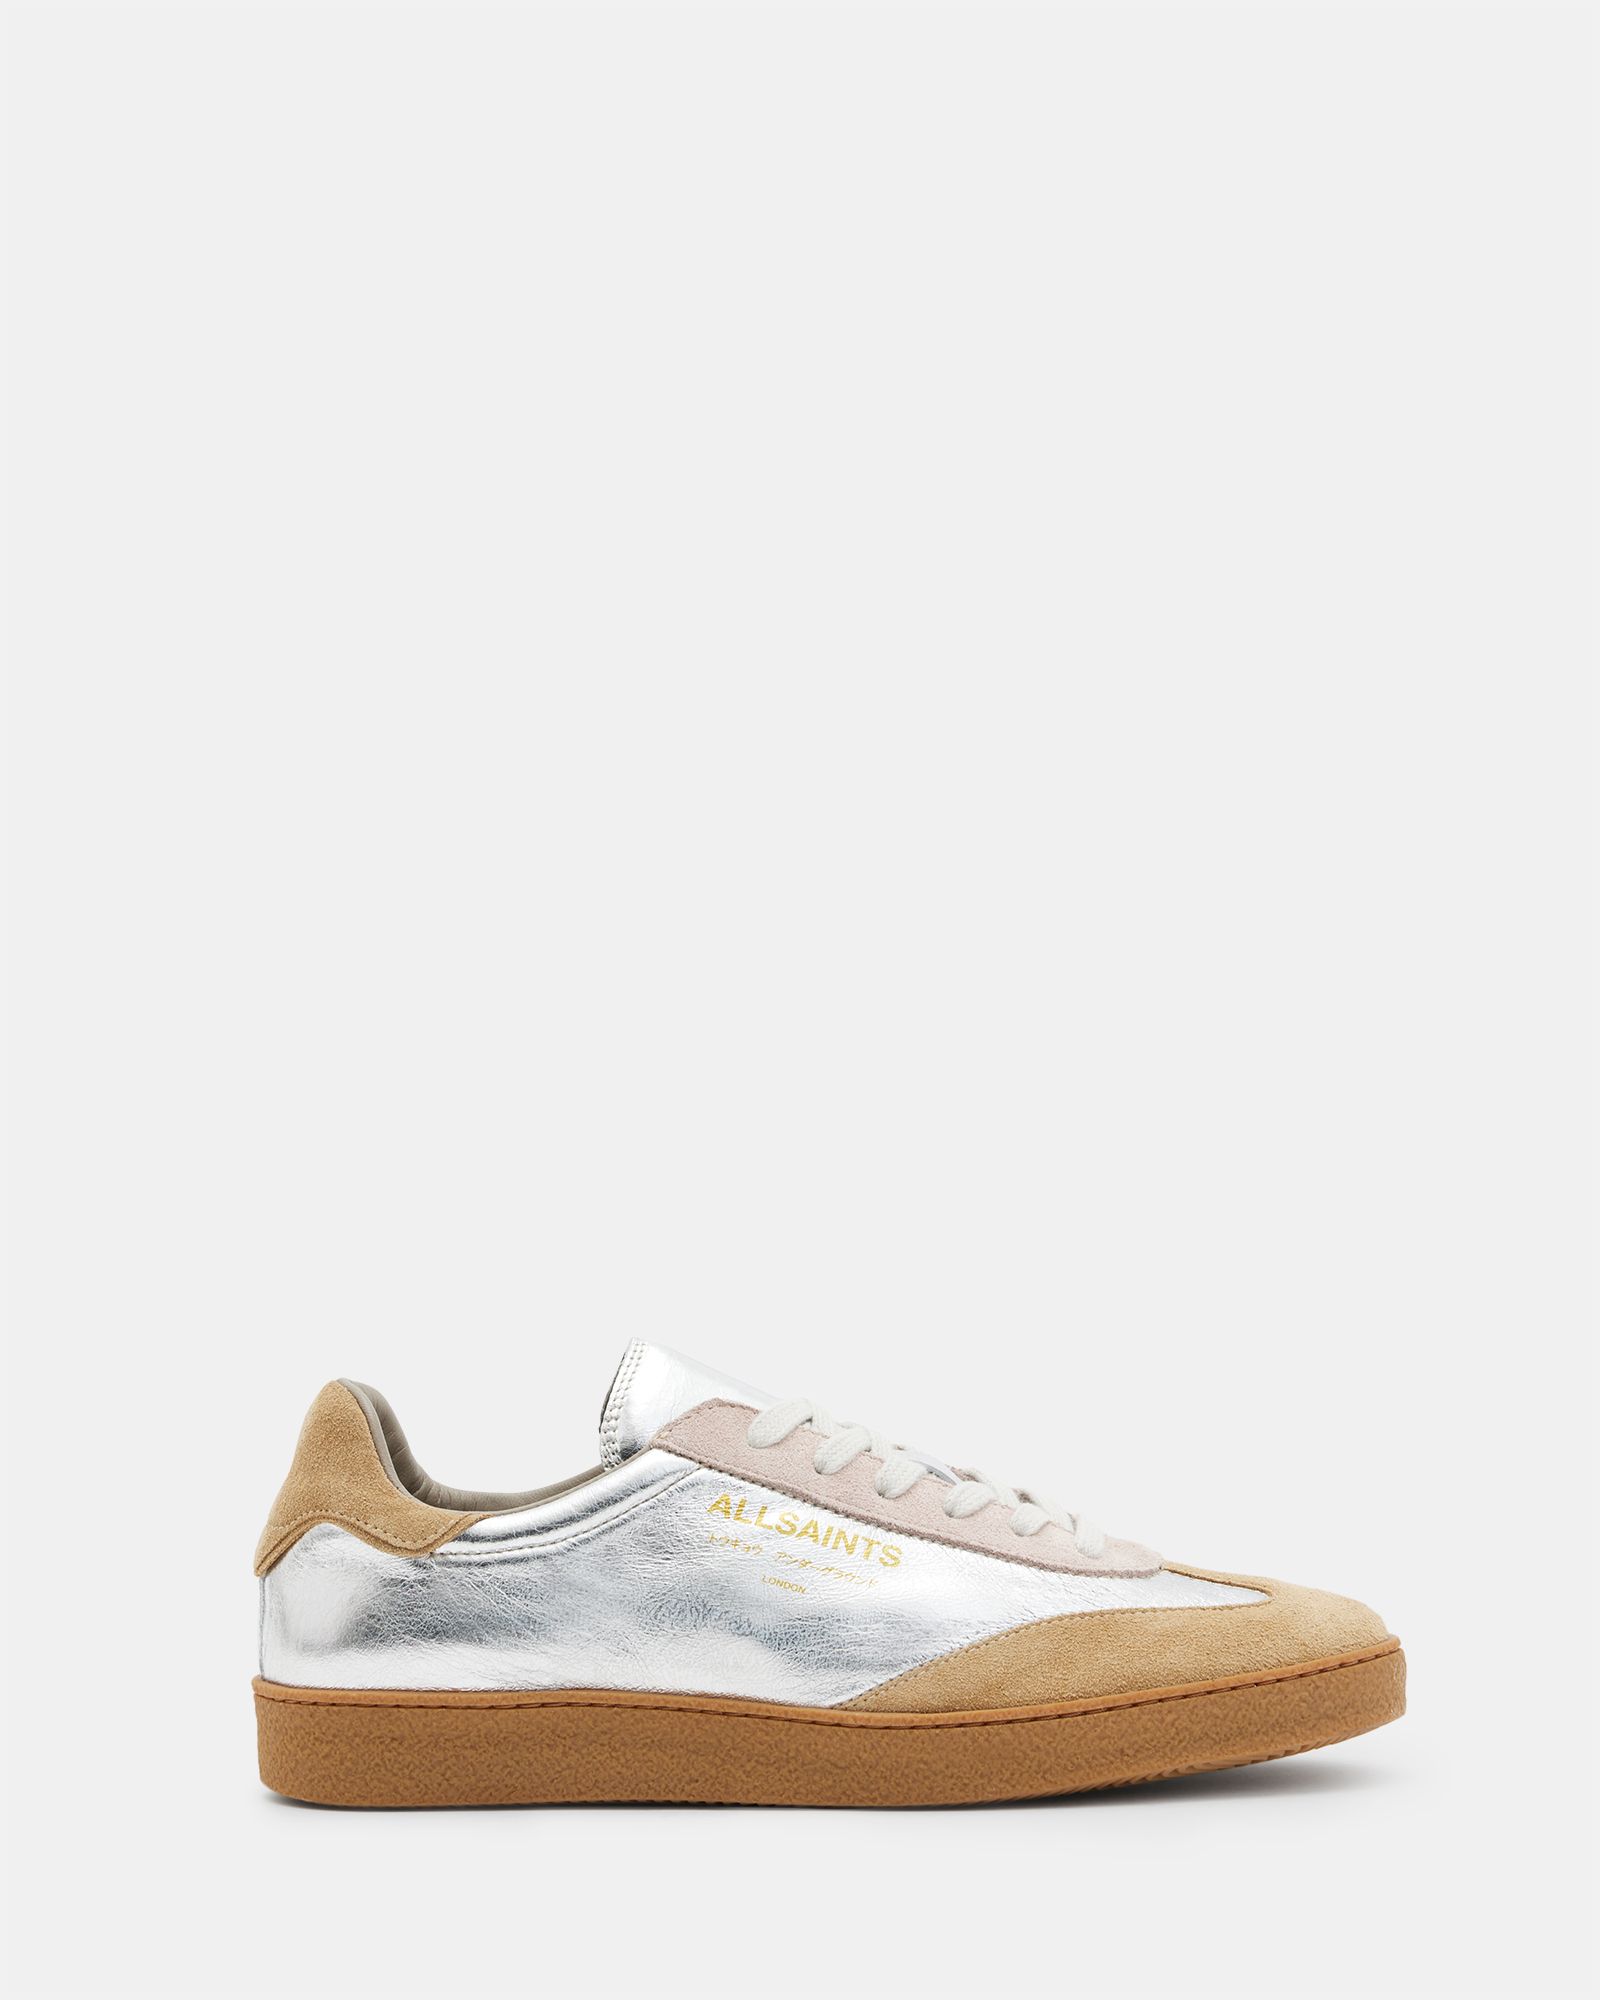 Thelma Suede Low Top Sneakers SILVER/ROSE PINK | ALLSAINTS US | AllSaints US